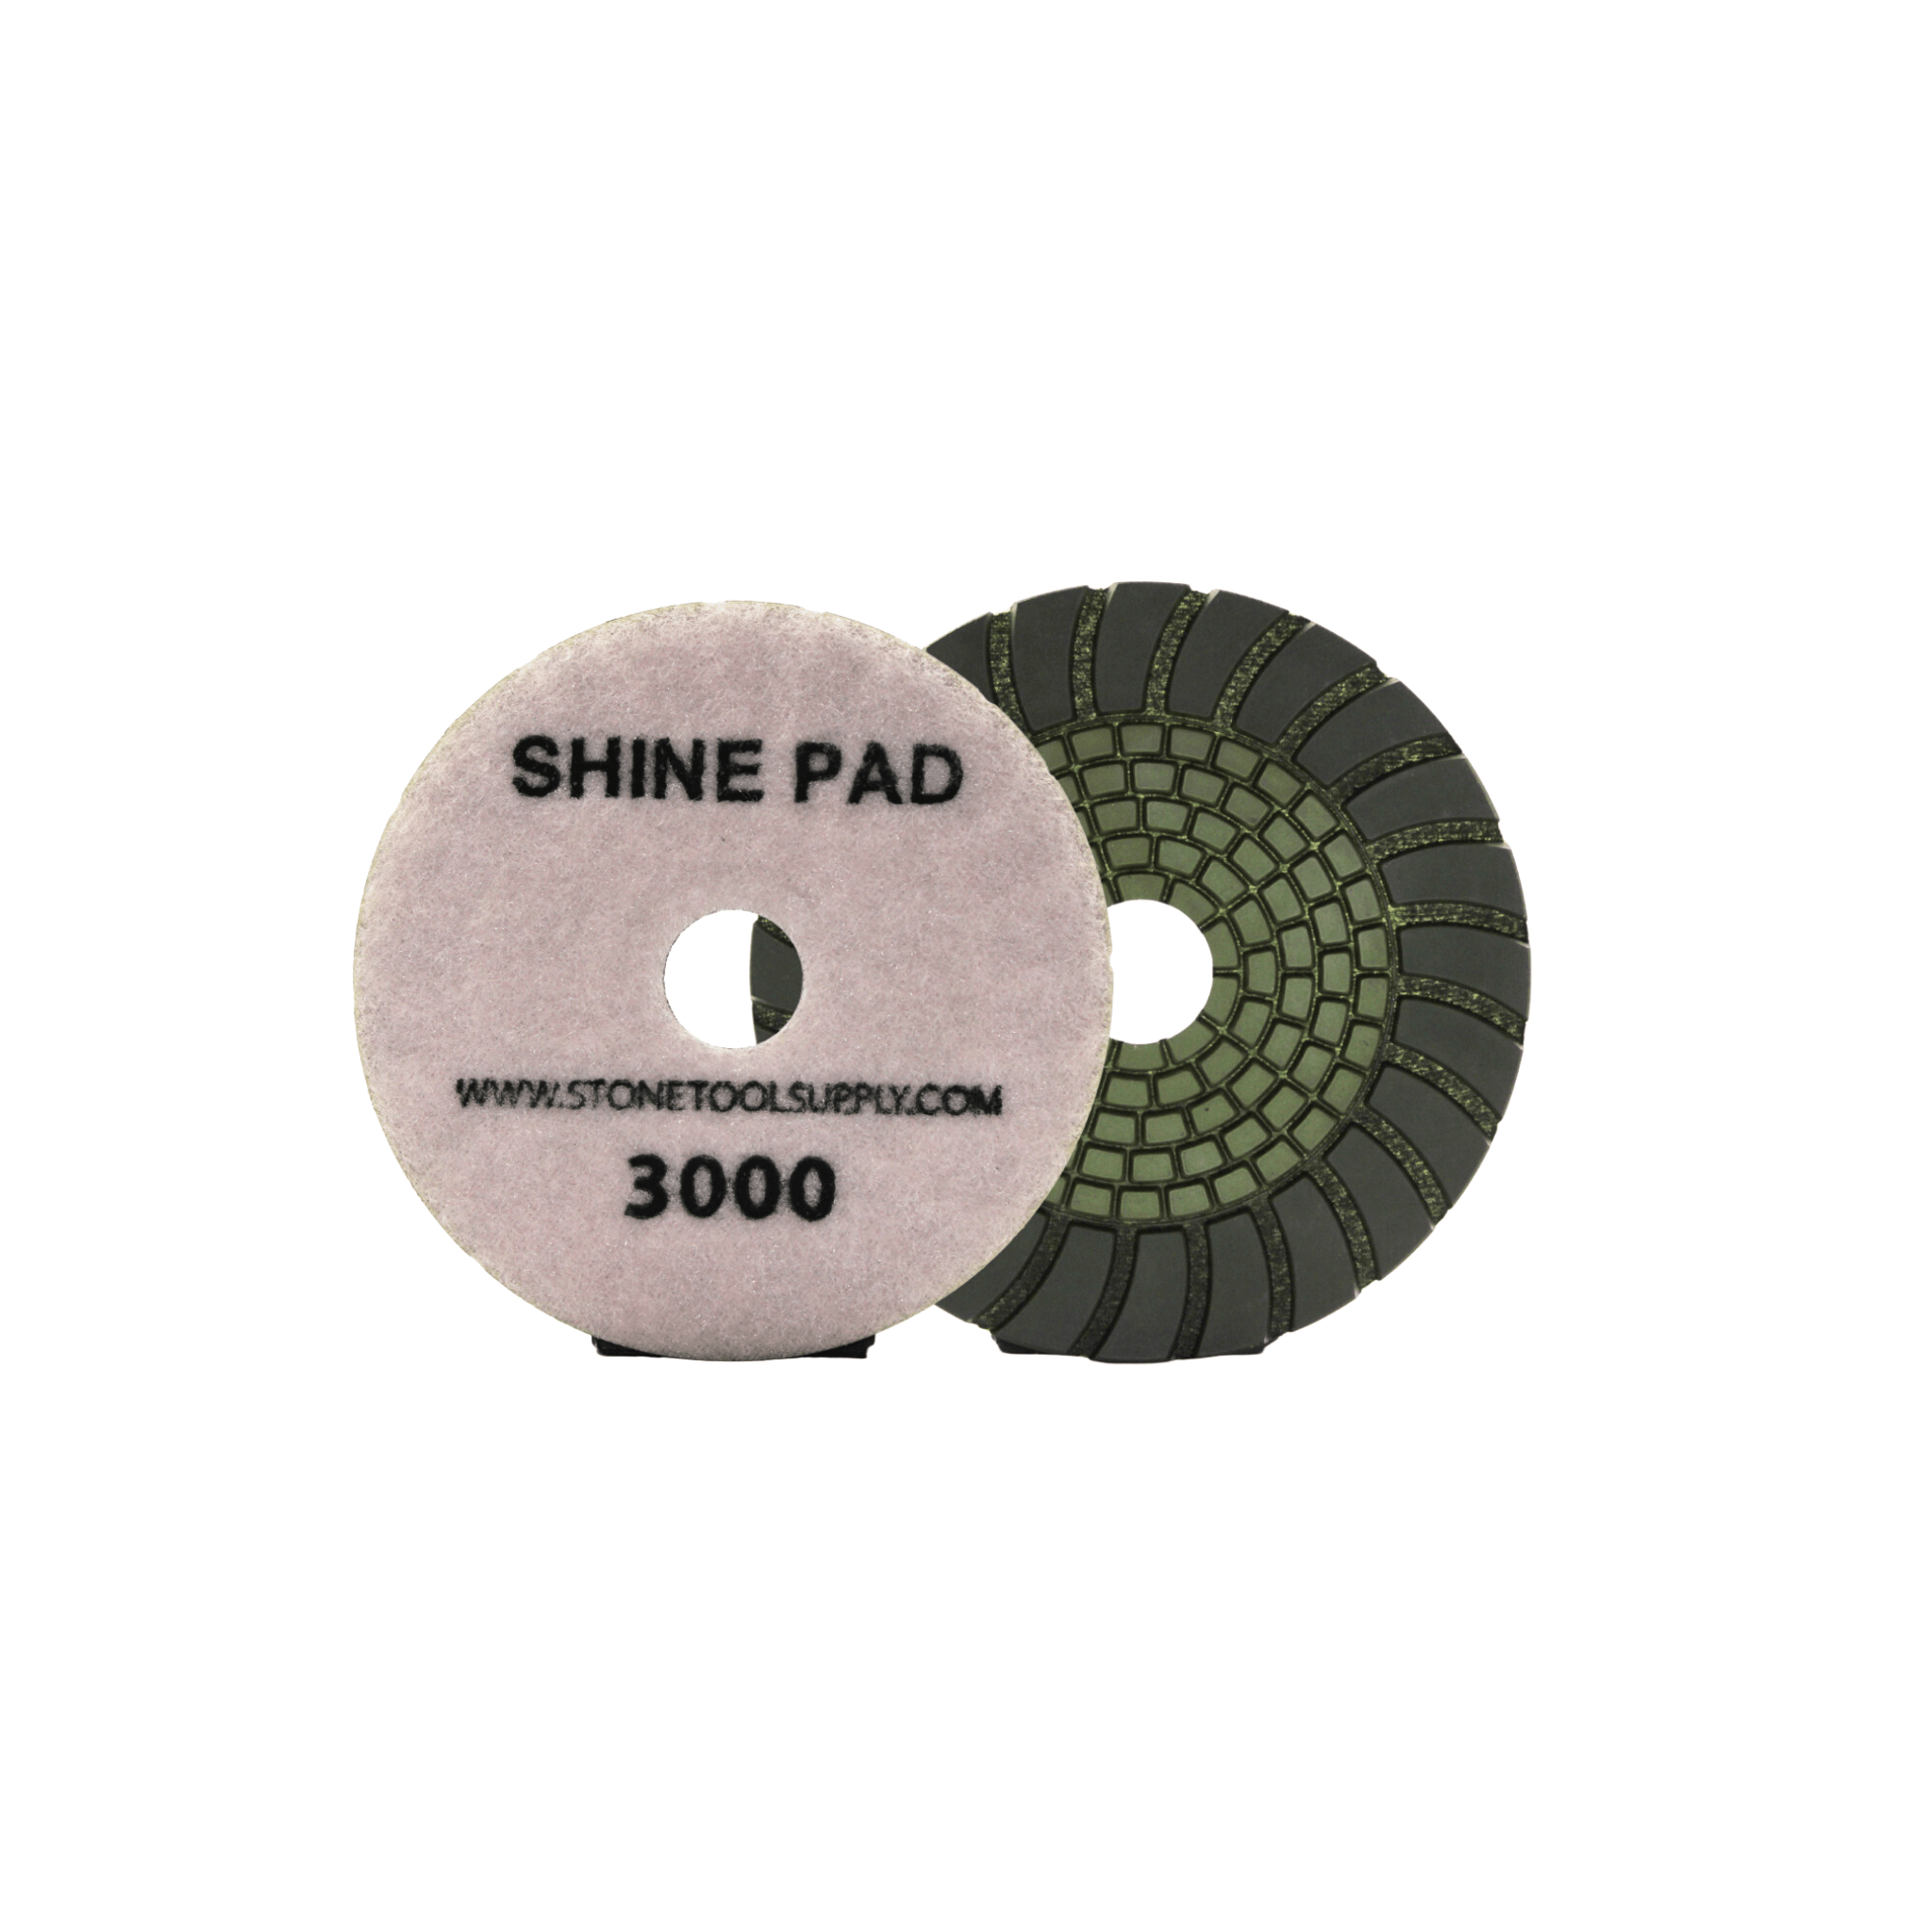 Copper and Resin Bonded 'Shine' Pad 4" #3000 - Direct Stone Tool Supply, Inc